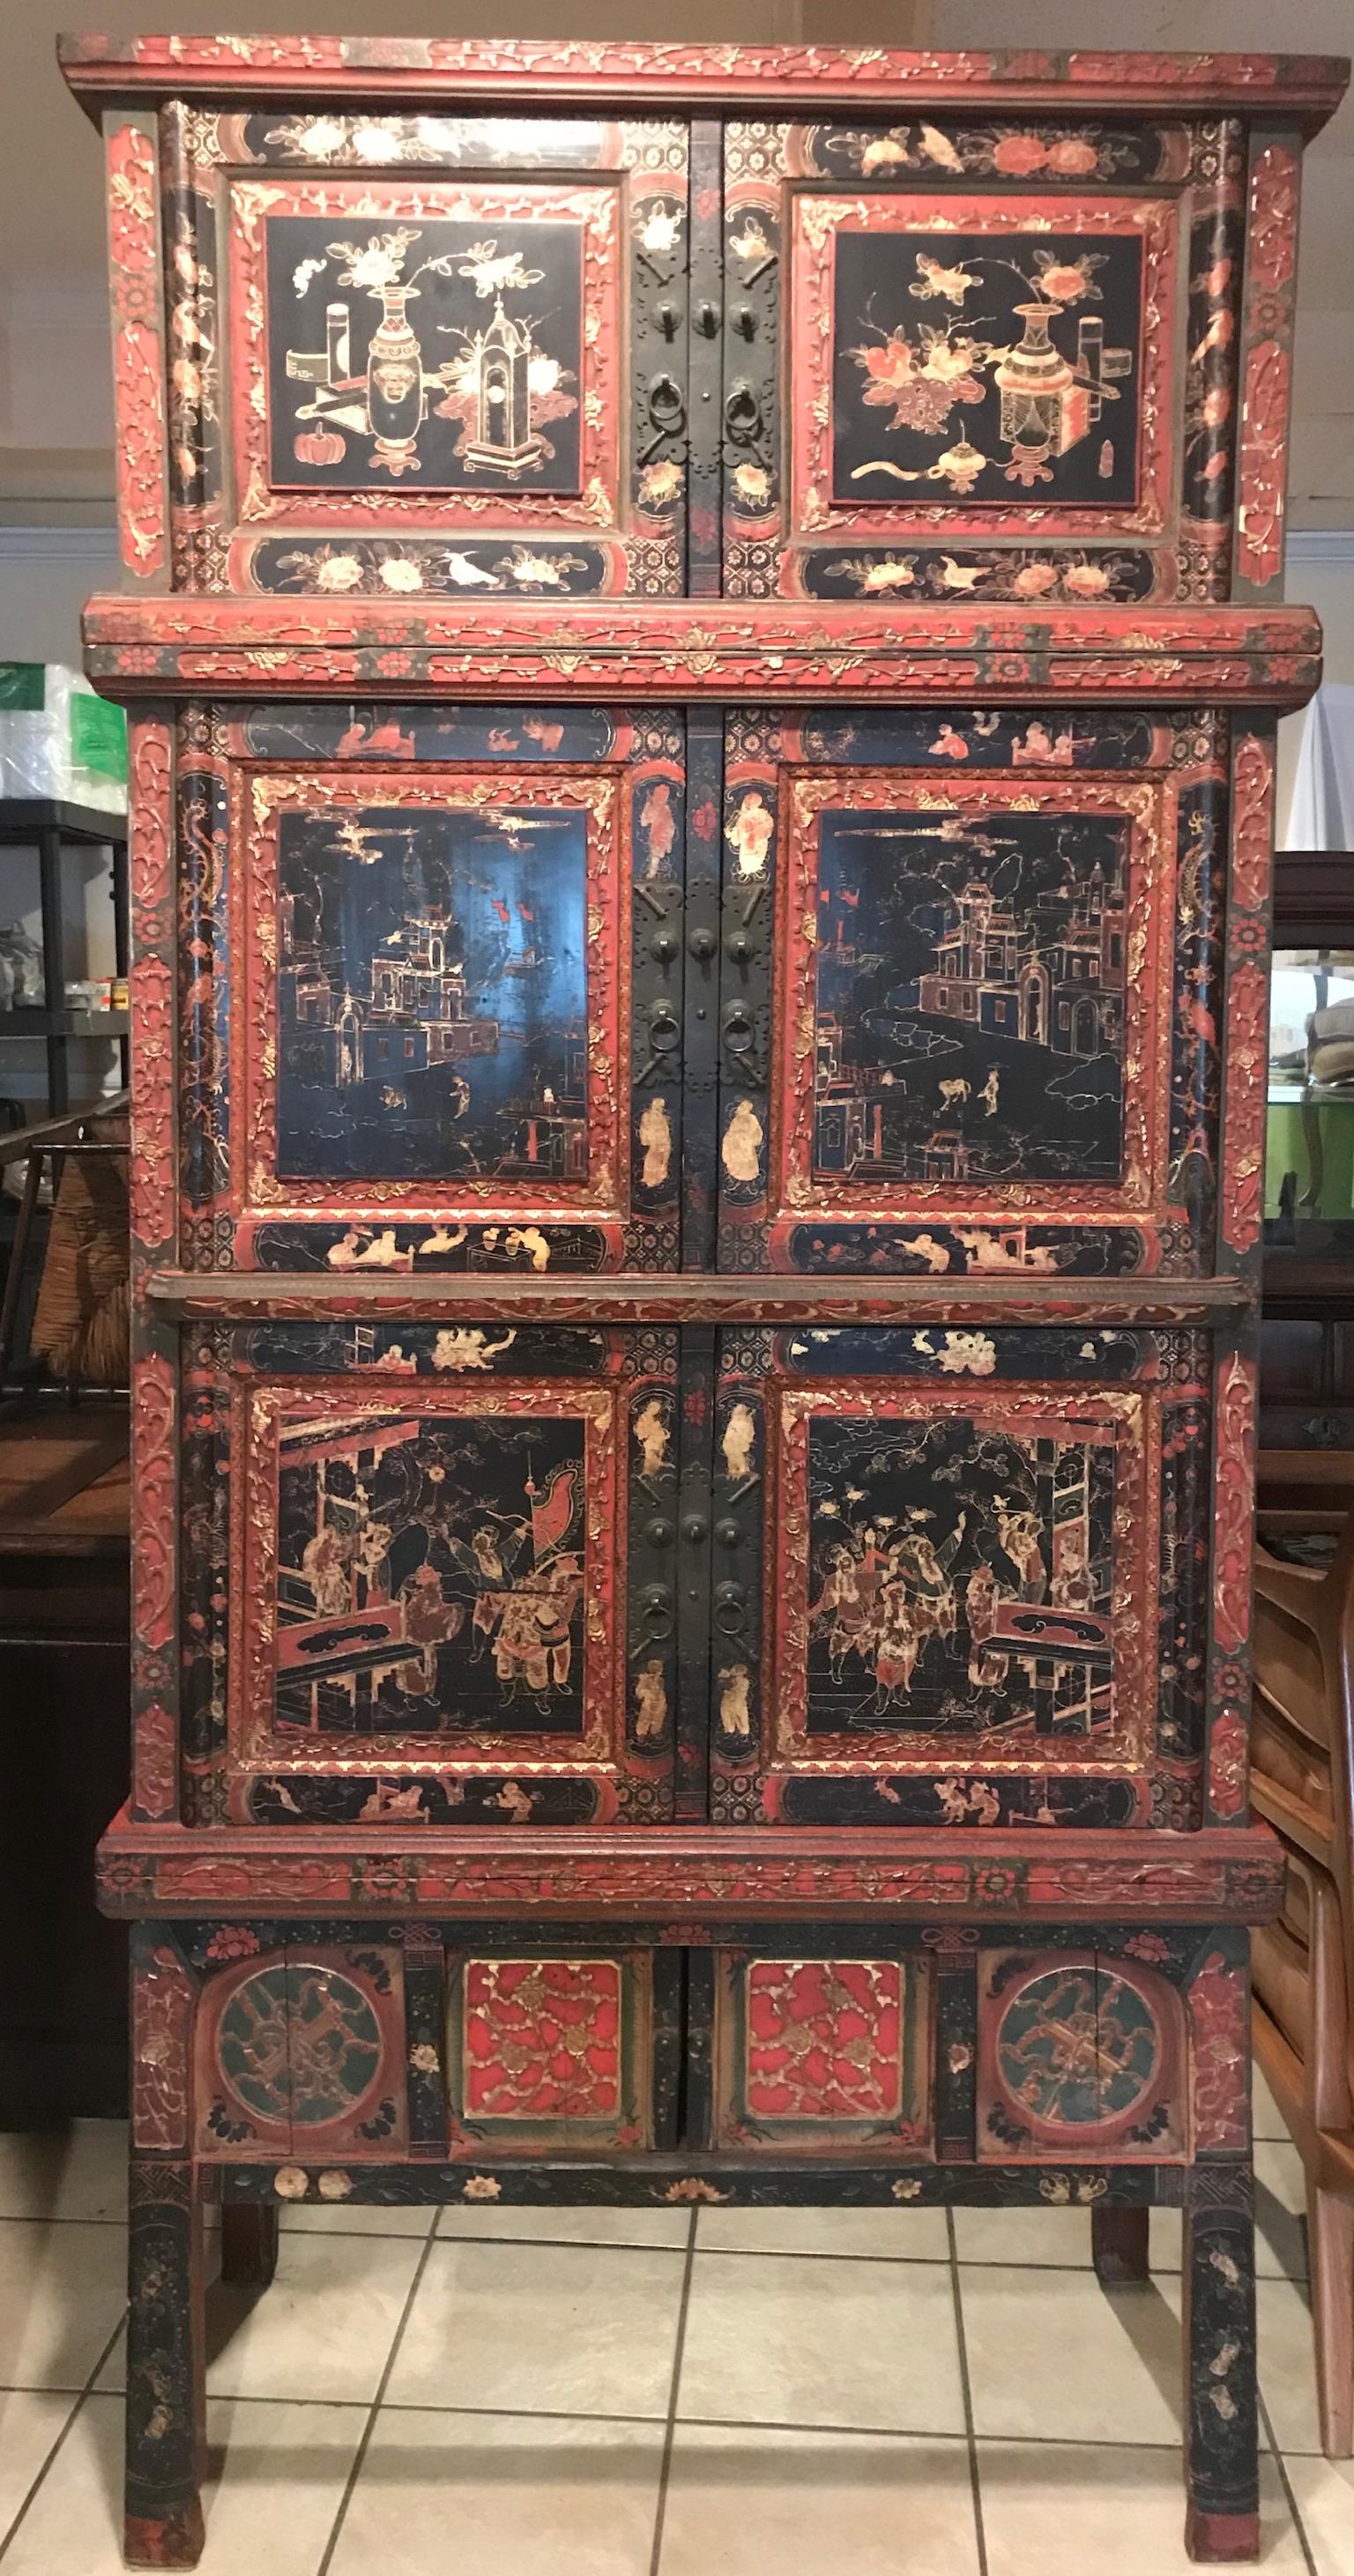 A tall Chinese painted and partial-gilt wedding chest, serves as an armoire, cabinet, bar or storage container. Very intricate hard painting of Asian Chinese motifs architectural designs and figures.

Early 20th century
Measures: 86-1/2 H x